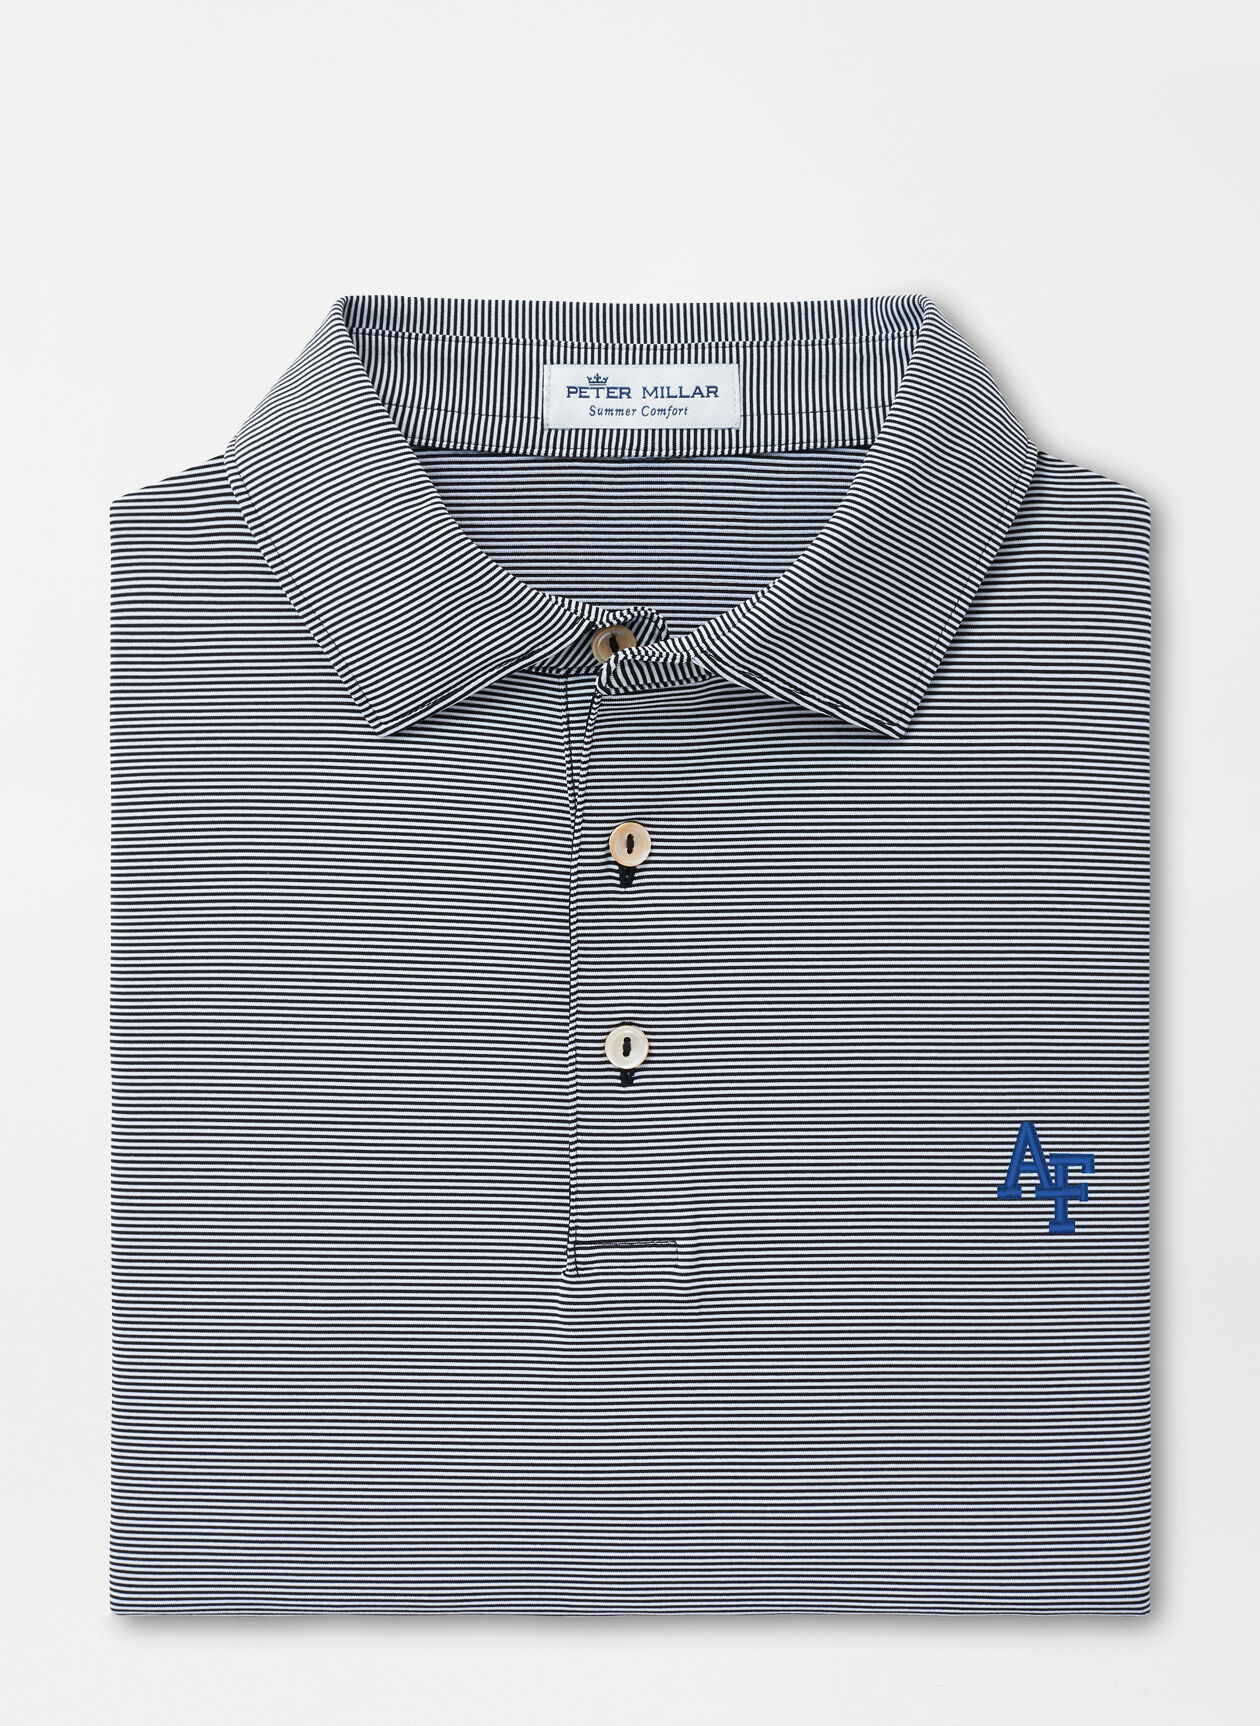 Air Force Academy Jubilee Performance Jersey Polo | Men's Collegiate ...